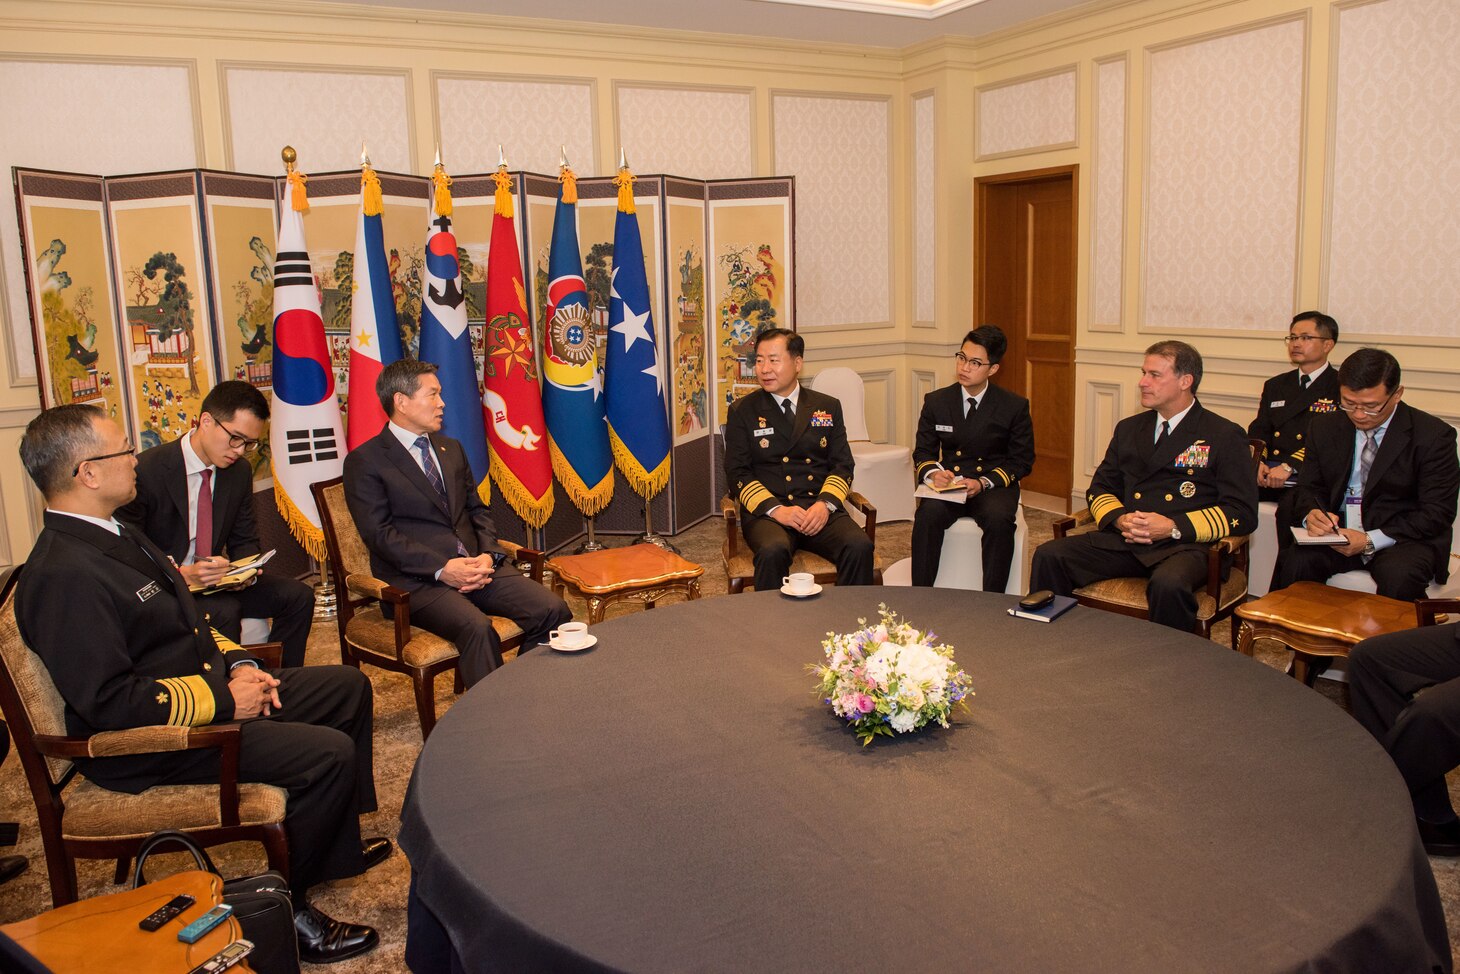 JEJU ISLAND, Republic of Korea, Republic of Korea (Oct. 12, 2018) Minister Jeong, Kyeong-doo, Republic of Korea (ROK) minister of national defense speaks with ROK Navy Chief of Naval Operations Adm. Sim, Seung-seob (center), Adm. Yutaka Murakawa, chief of maritime staff for Japan Maritime Self-Defense Force (left), and Adm. John Aquilino, commander, U.S. Pacific Fleet (right), during an office call in Jeju. Aquilino is visiting the ROK to observe the 2018 ROK International Fleet review as well as attend the 2018 Western Pacific Naval Symposium being hosted by the ROK Navy.